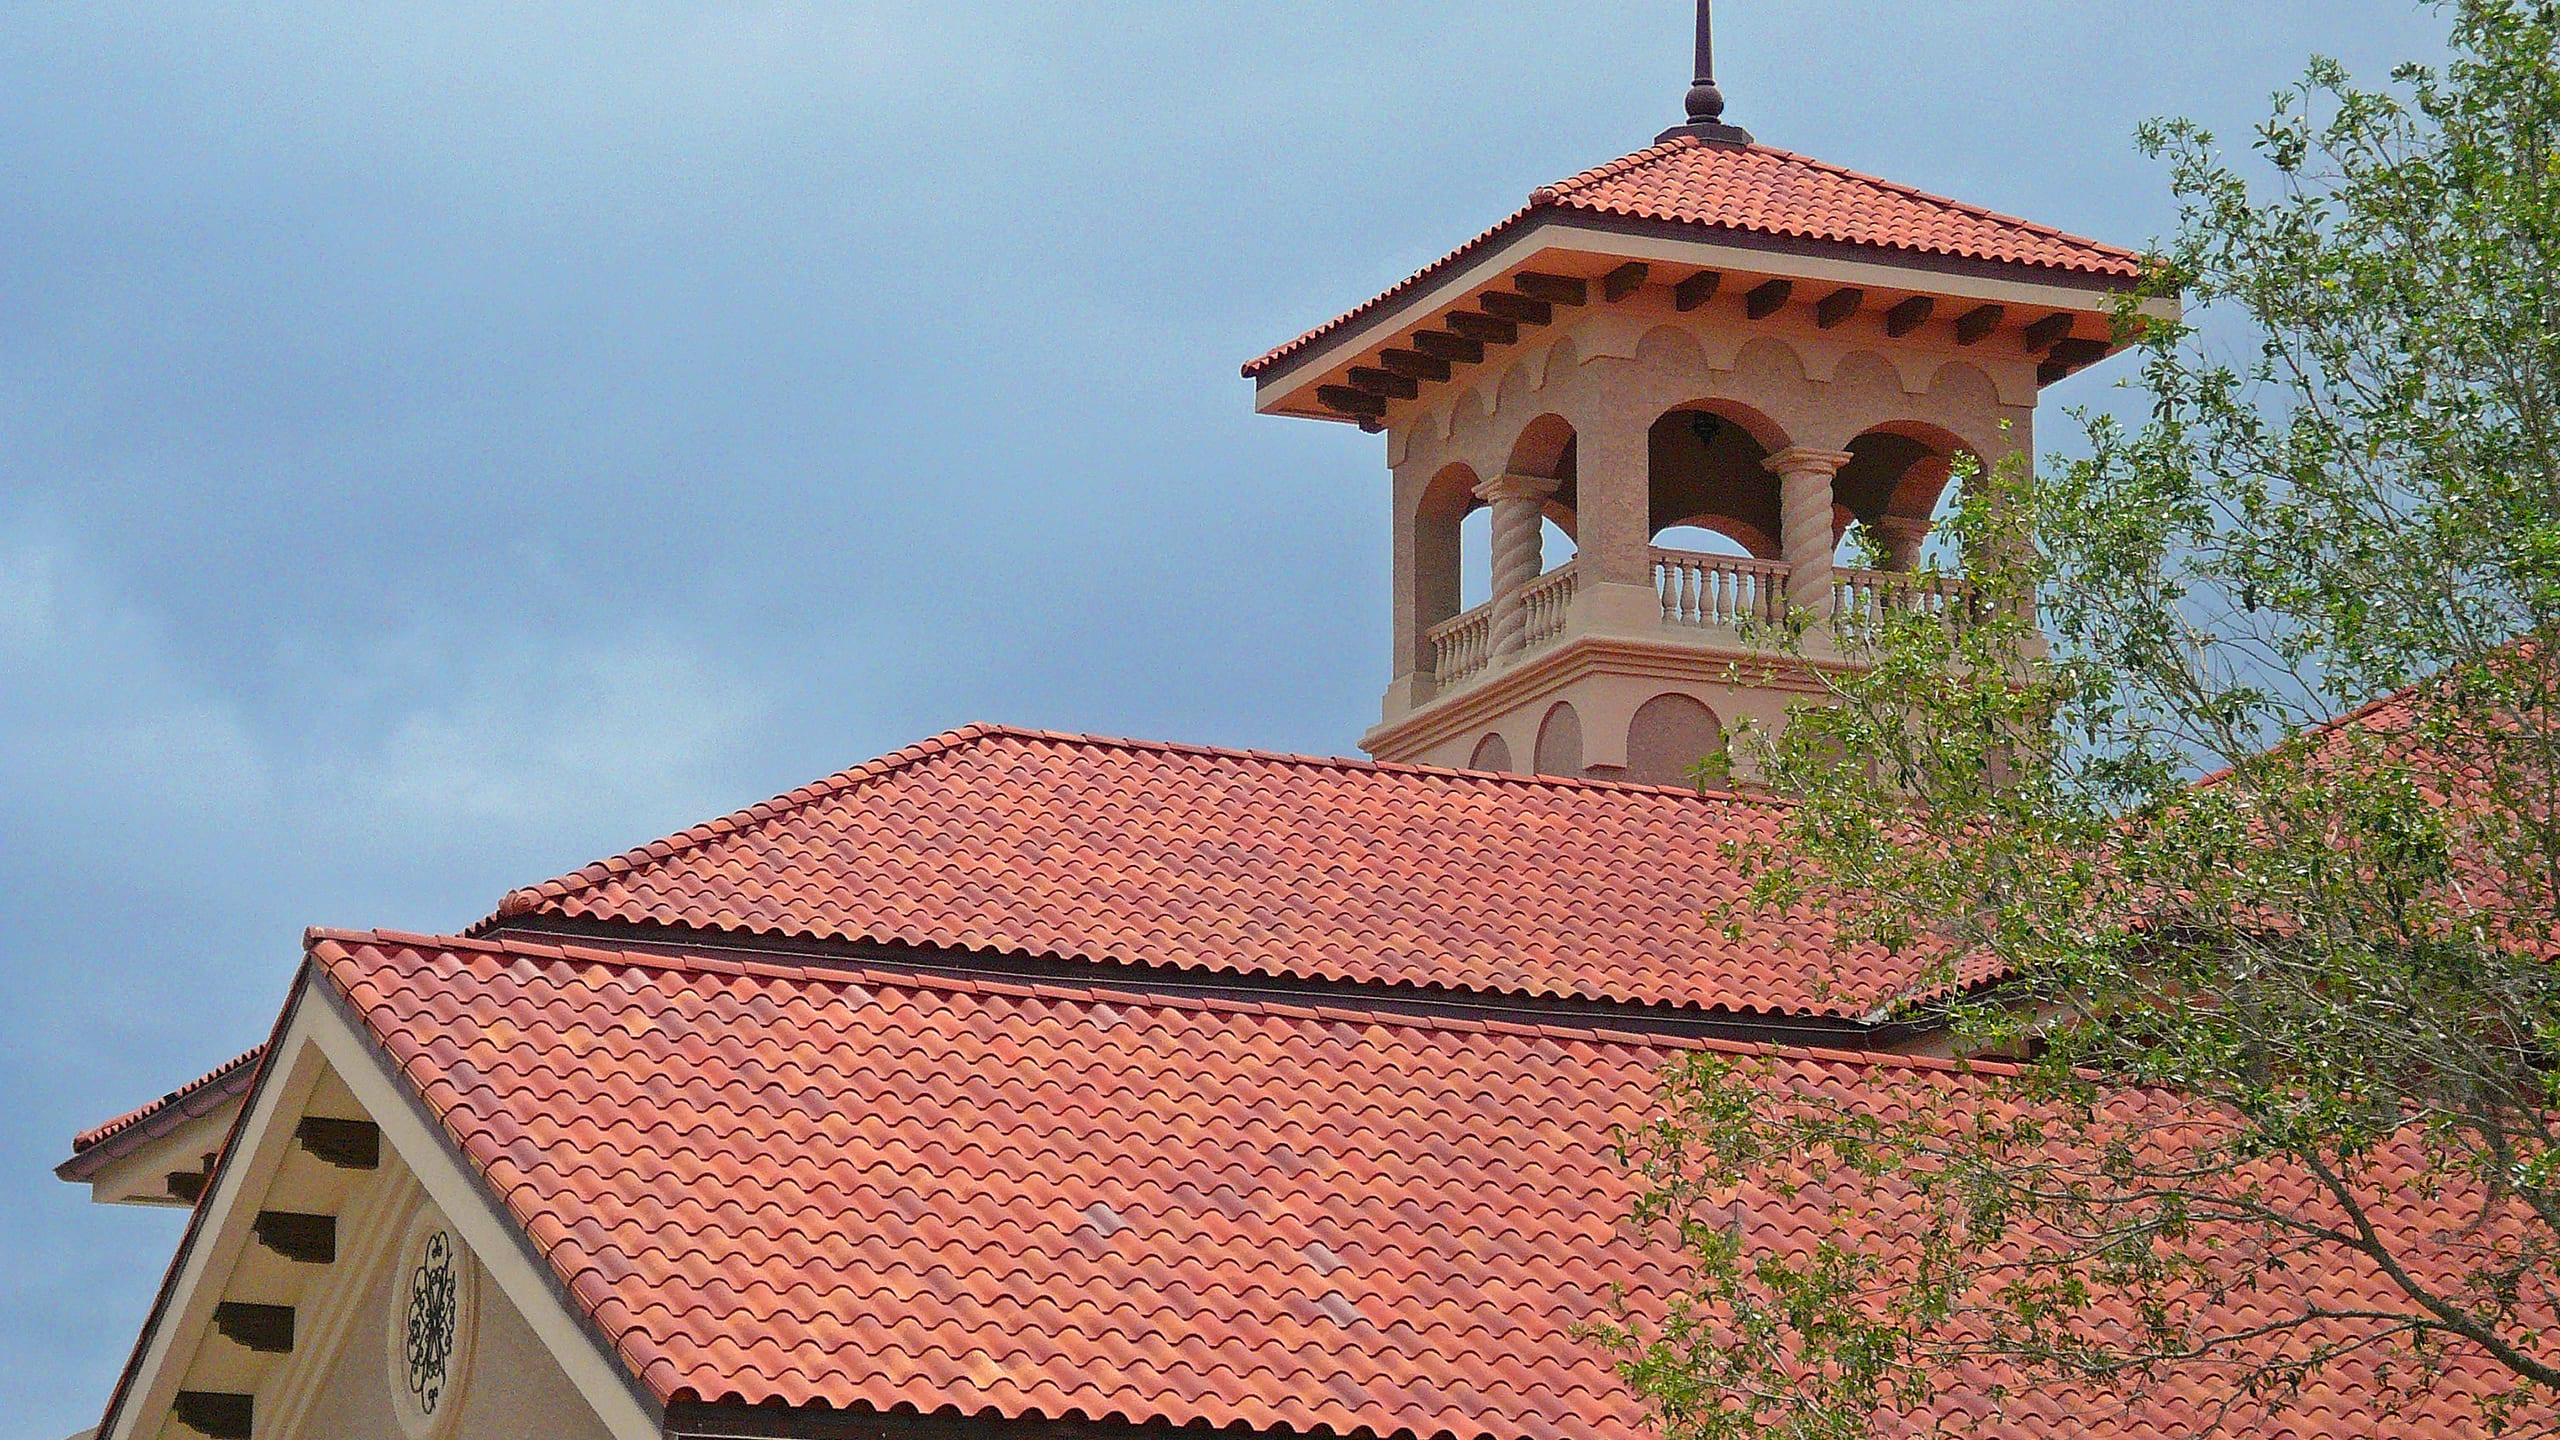 TPC Sawgrass Featuring Ludowici Spanish Clay Roof Tile